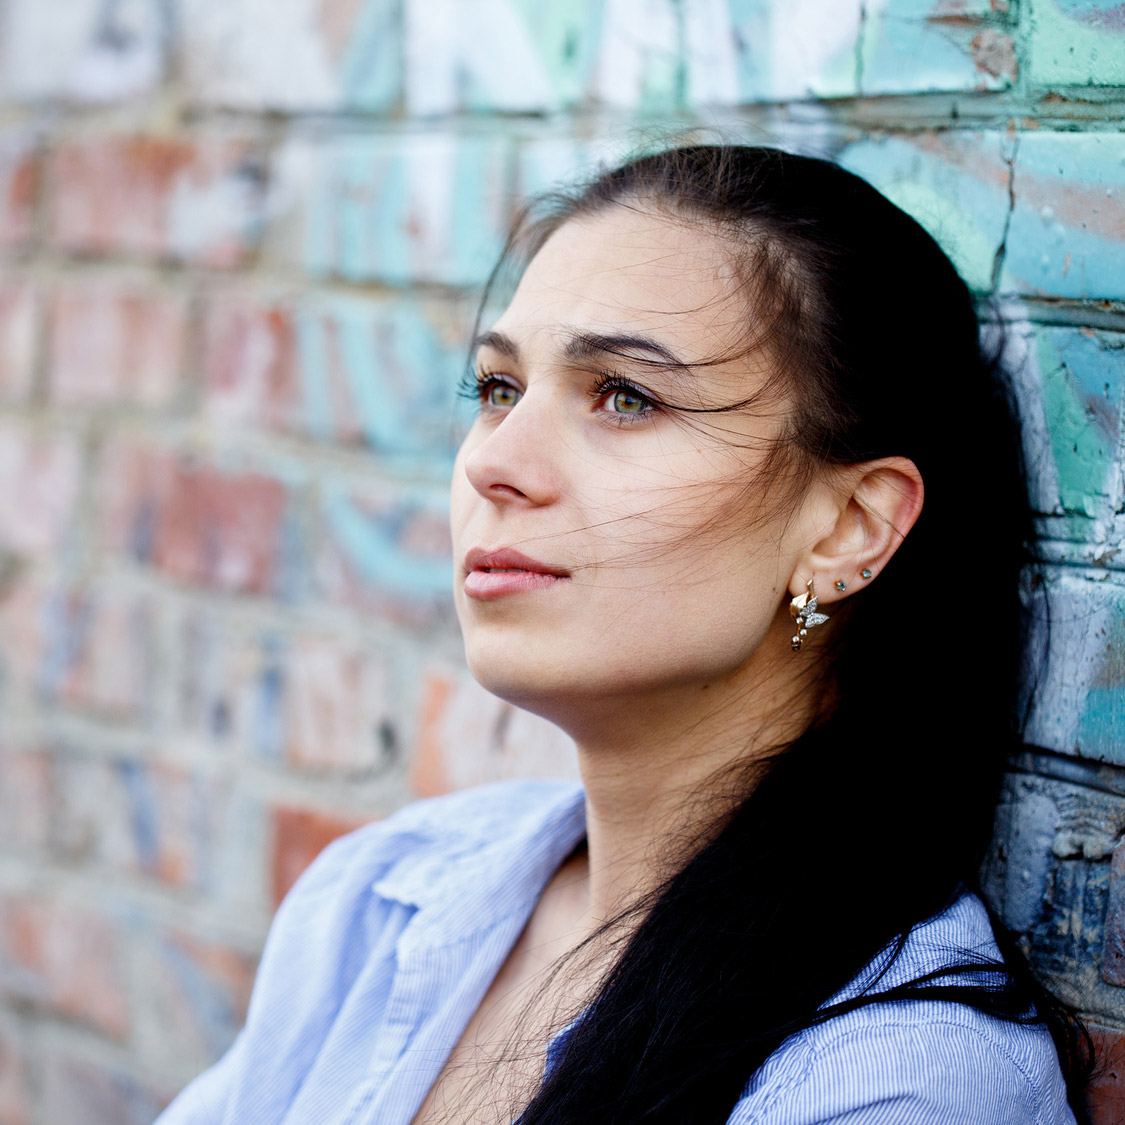 A woman sits against a brick wall and stares into space